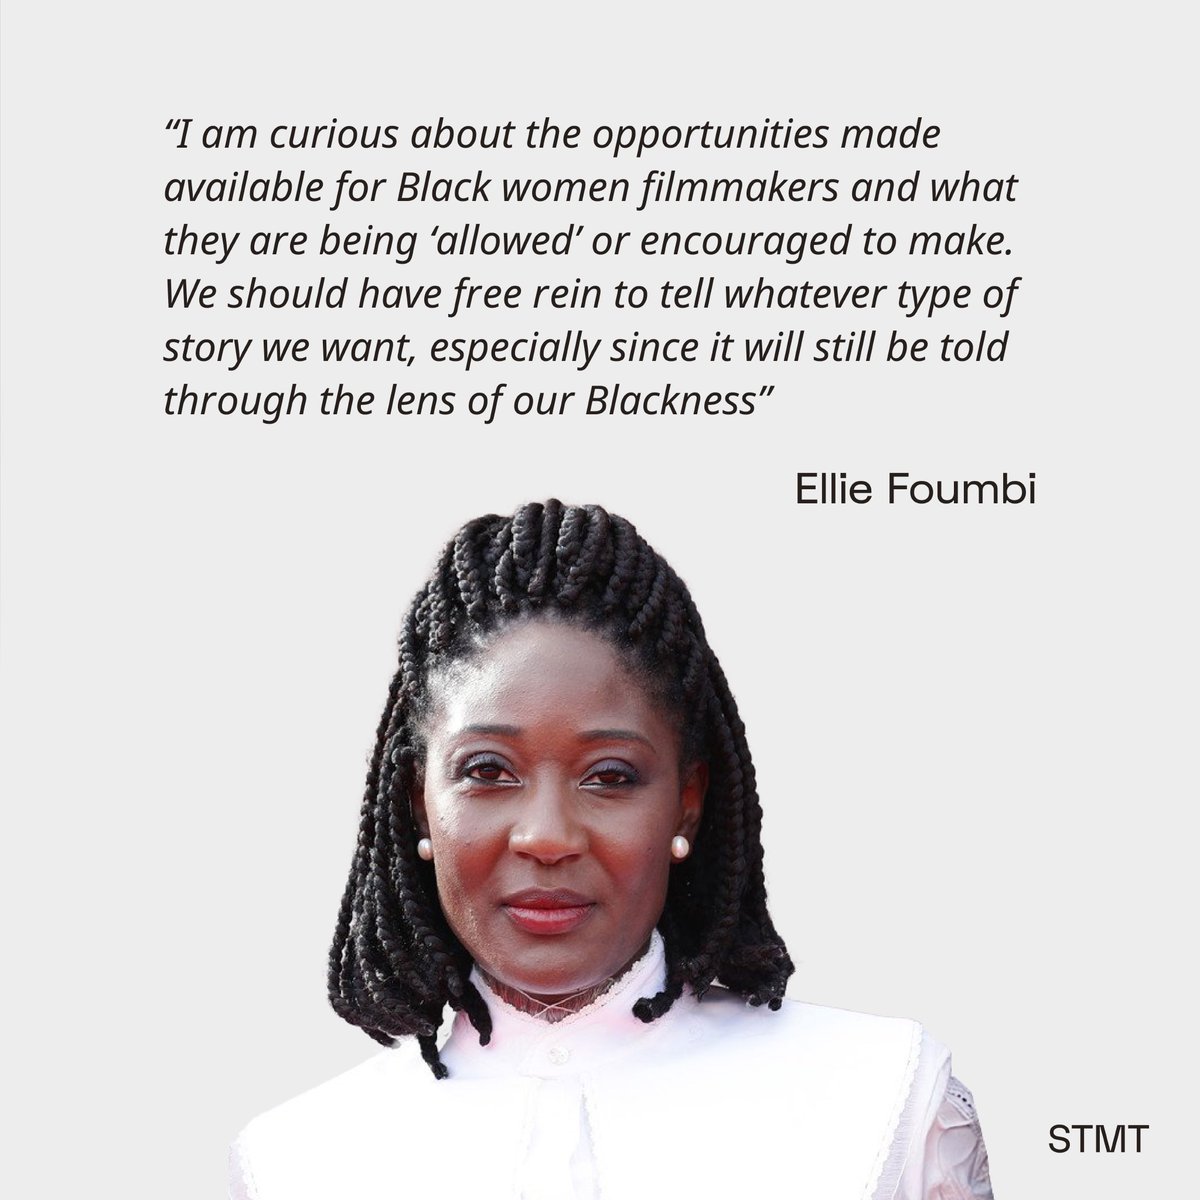 We asked @EllieAnette about her thoughts on opportunities for black women filmmakers. Being the second black female director to feature at Venice, we were curious to know whether she thought there were glass ceilings to be broken and here’s what she told us.